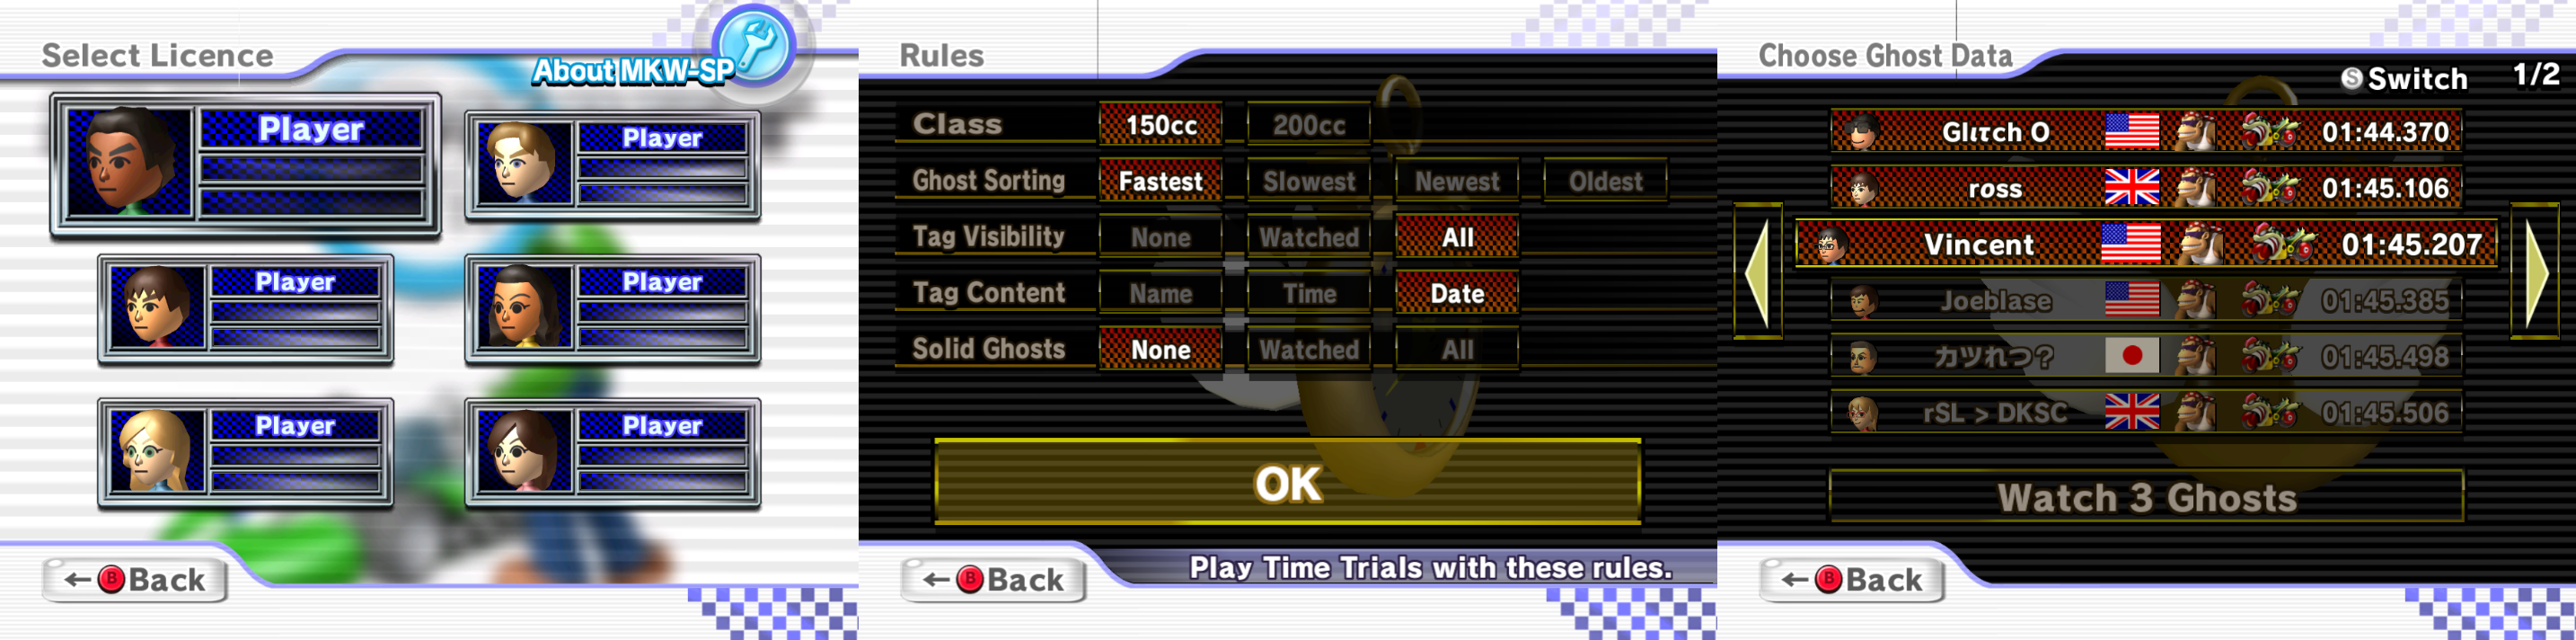 Screenshots of the UI for license selection, time trial rules and ghost selection